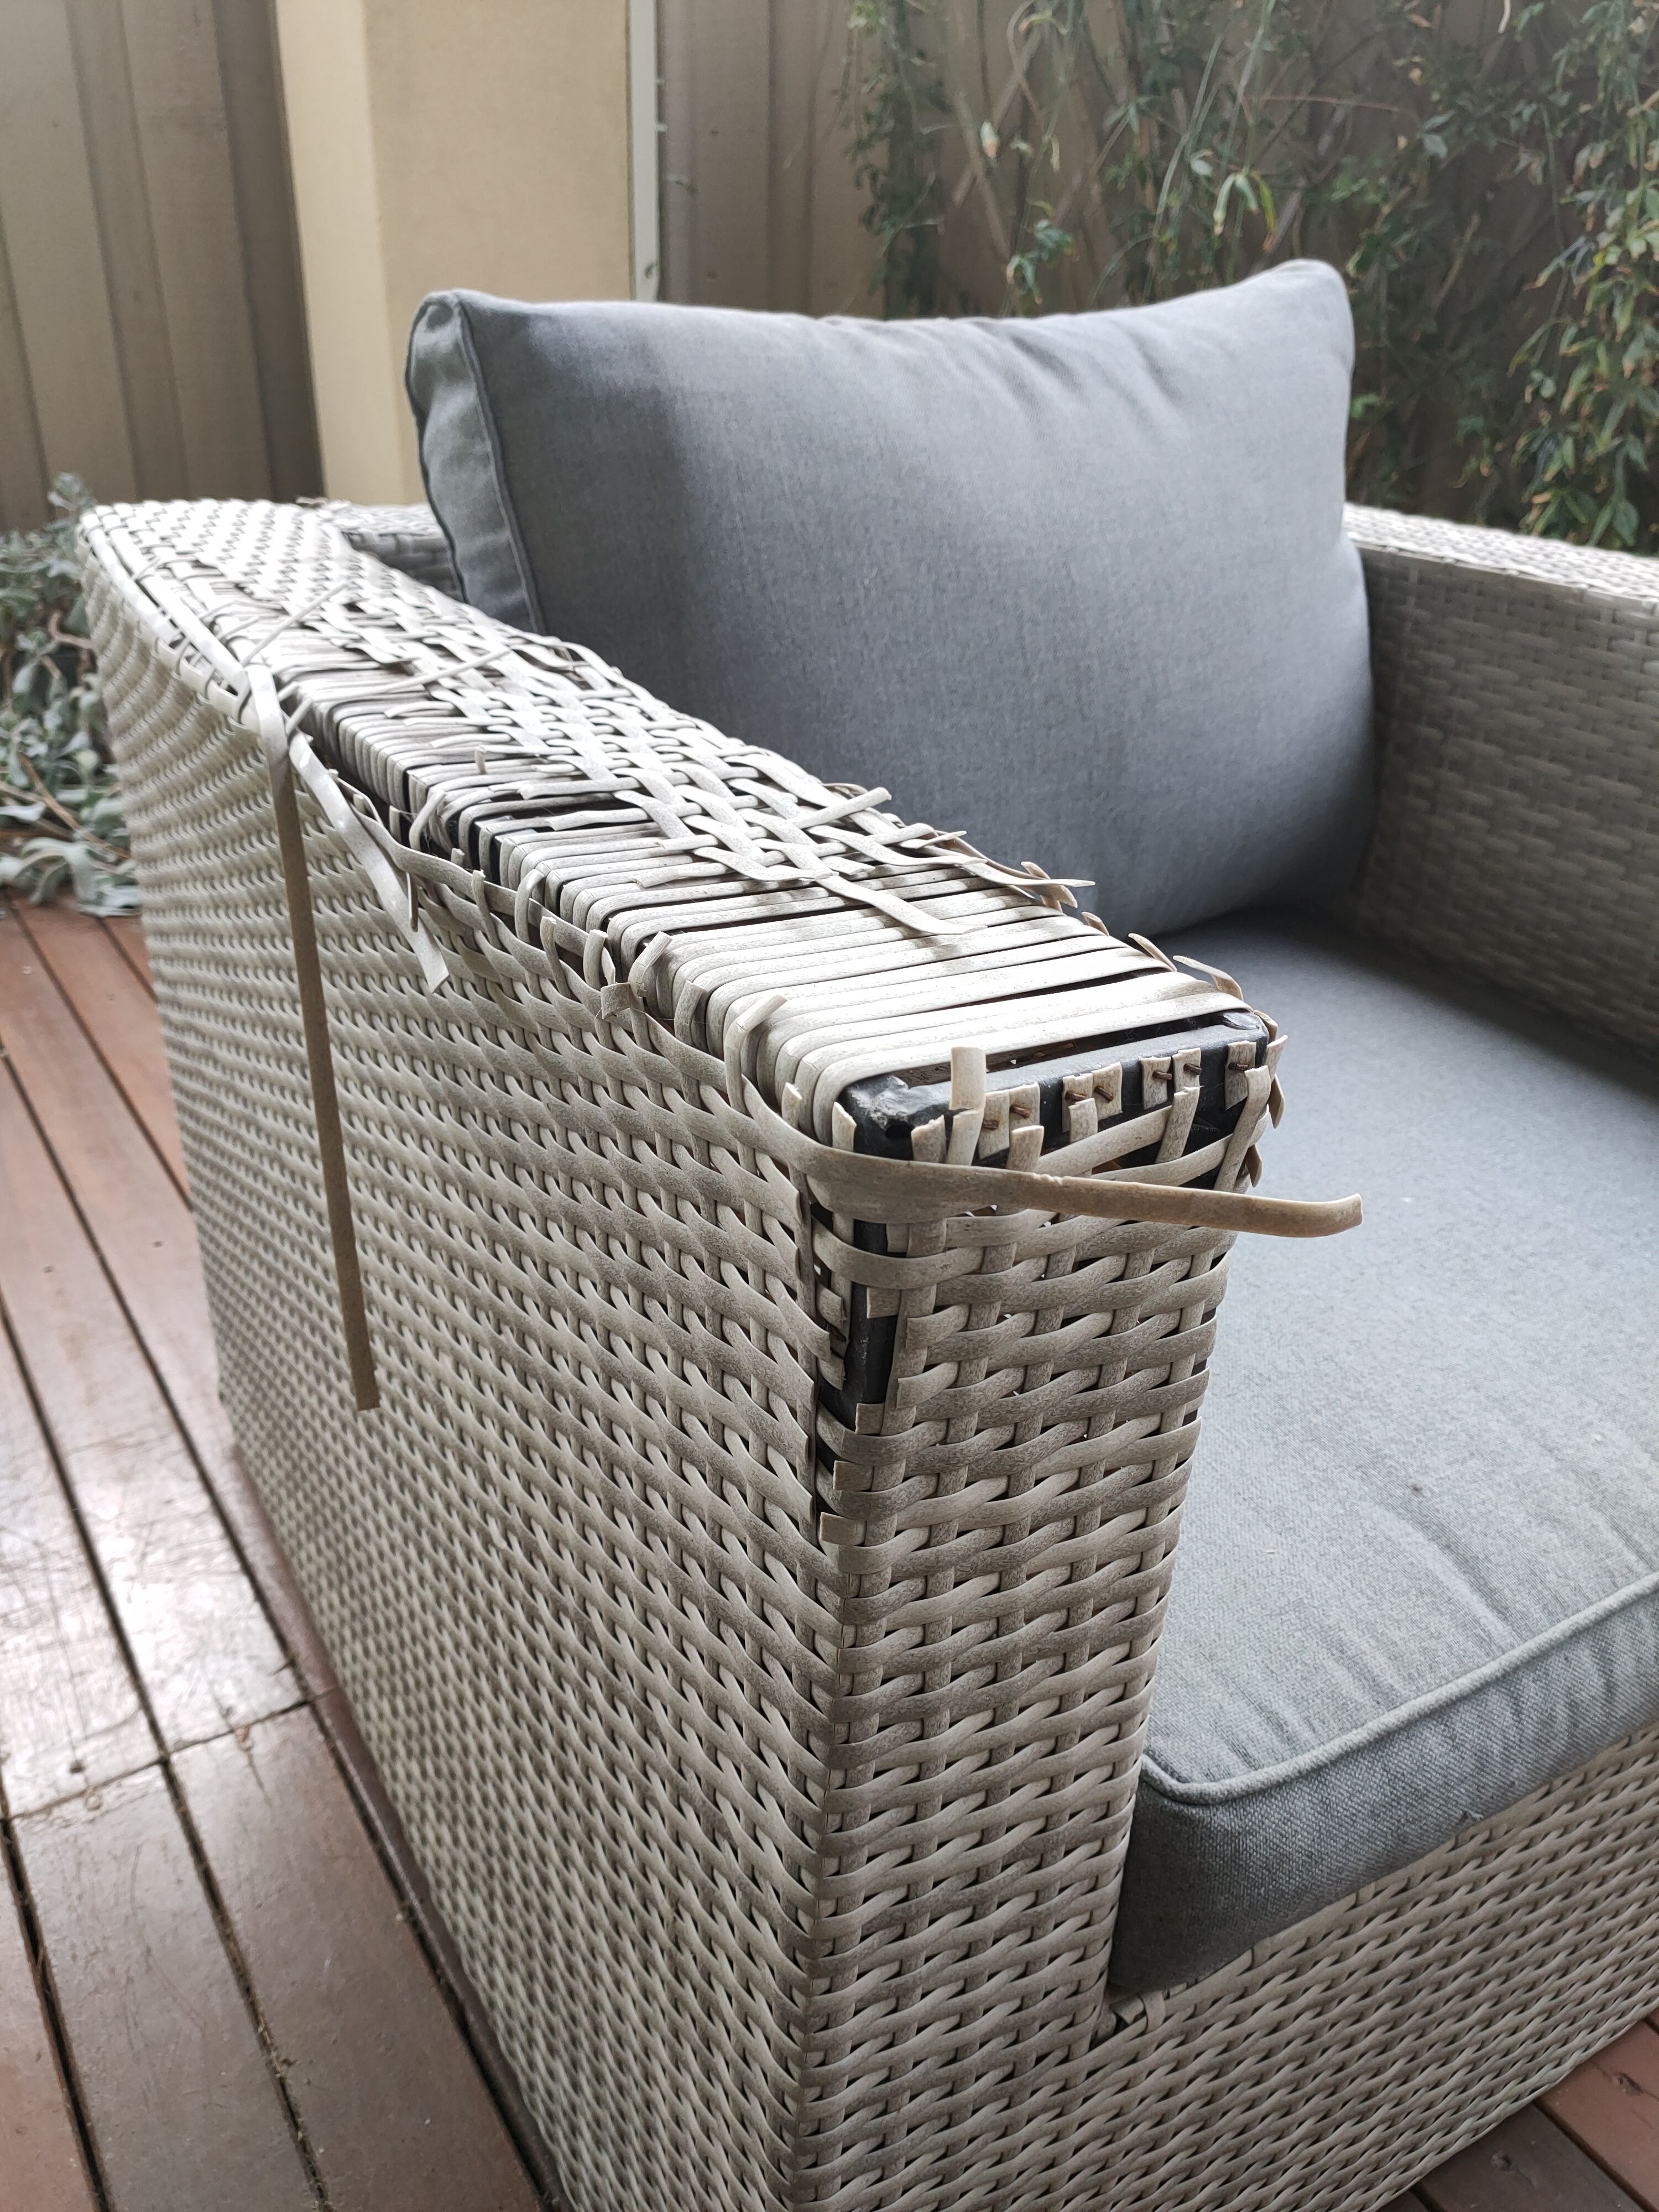 How do I repair my outdoor chairs? | Bunnings Workshop community